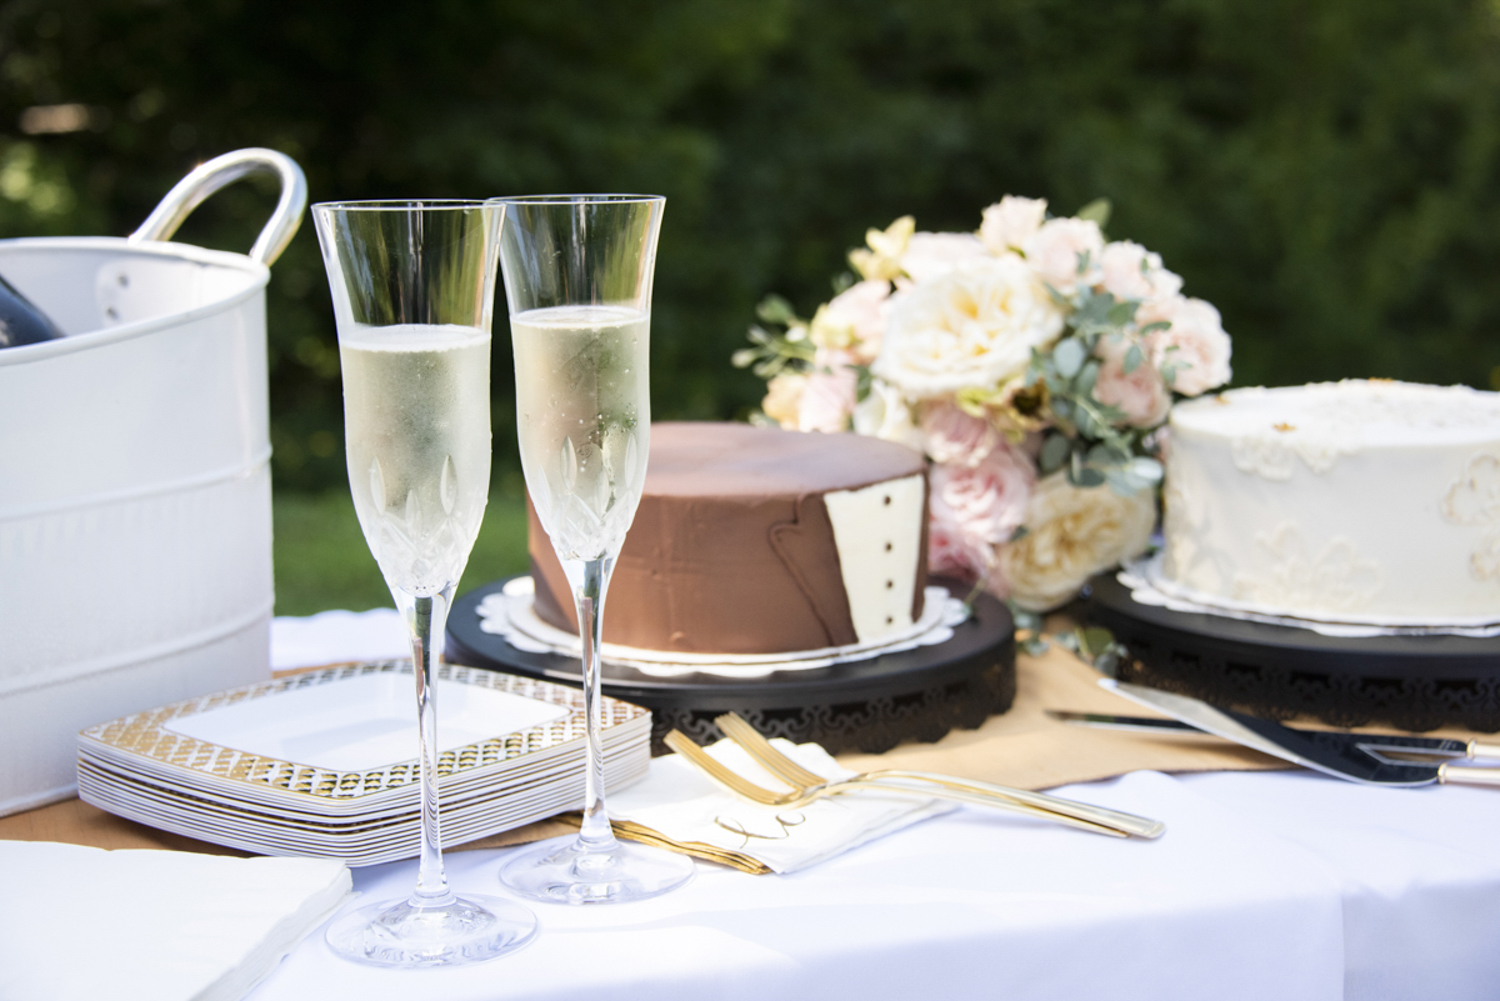 Champagne flutes and cakes